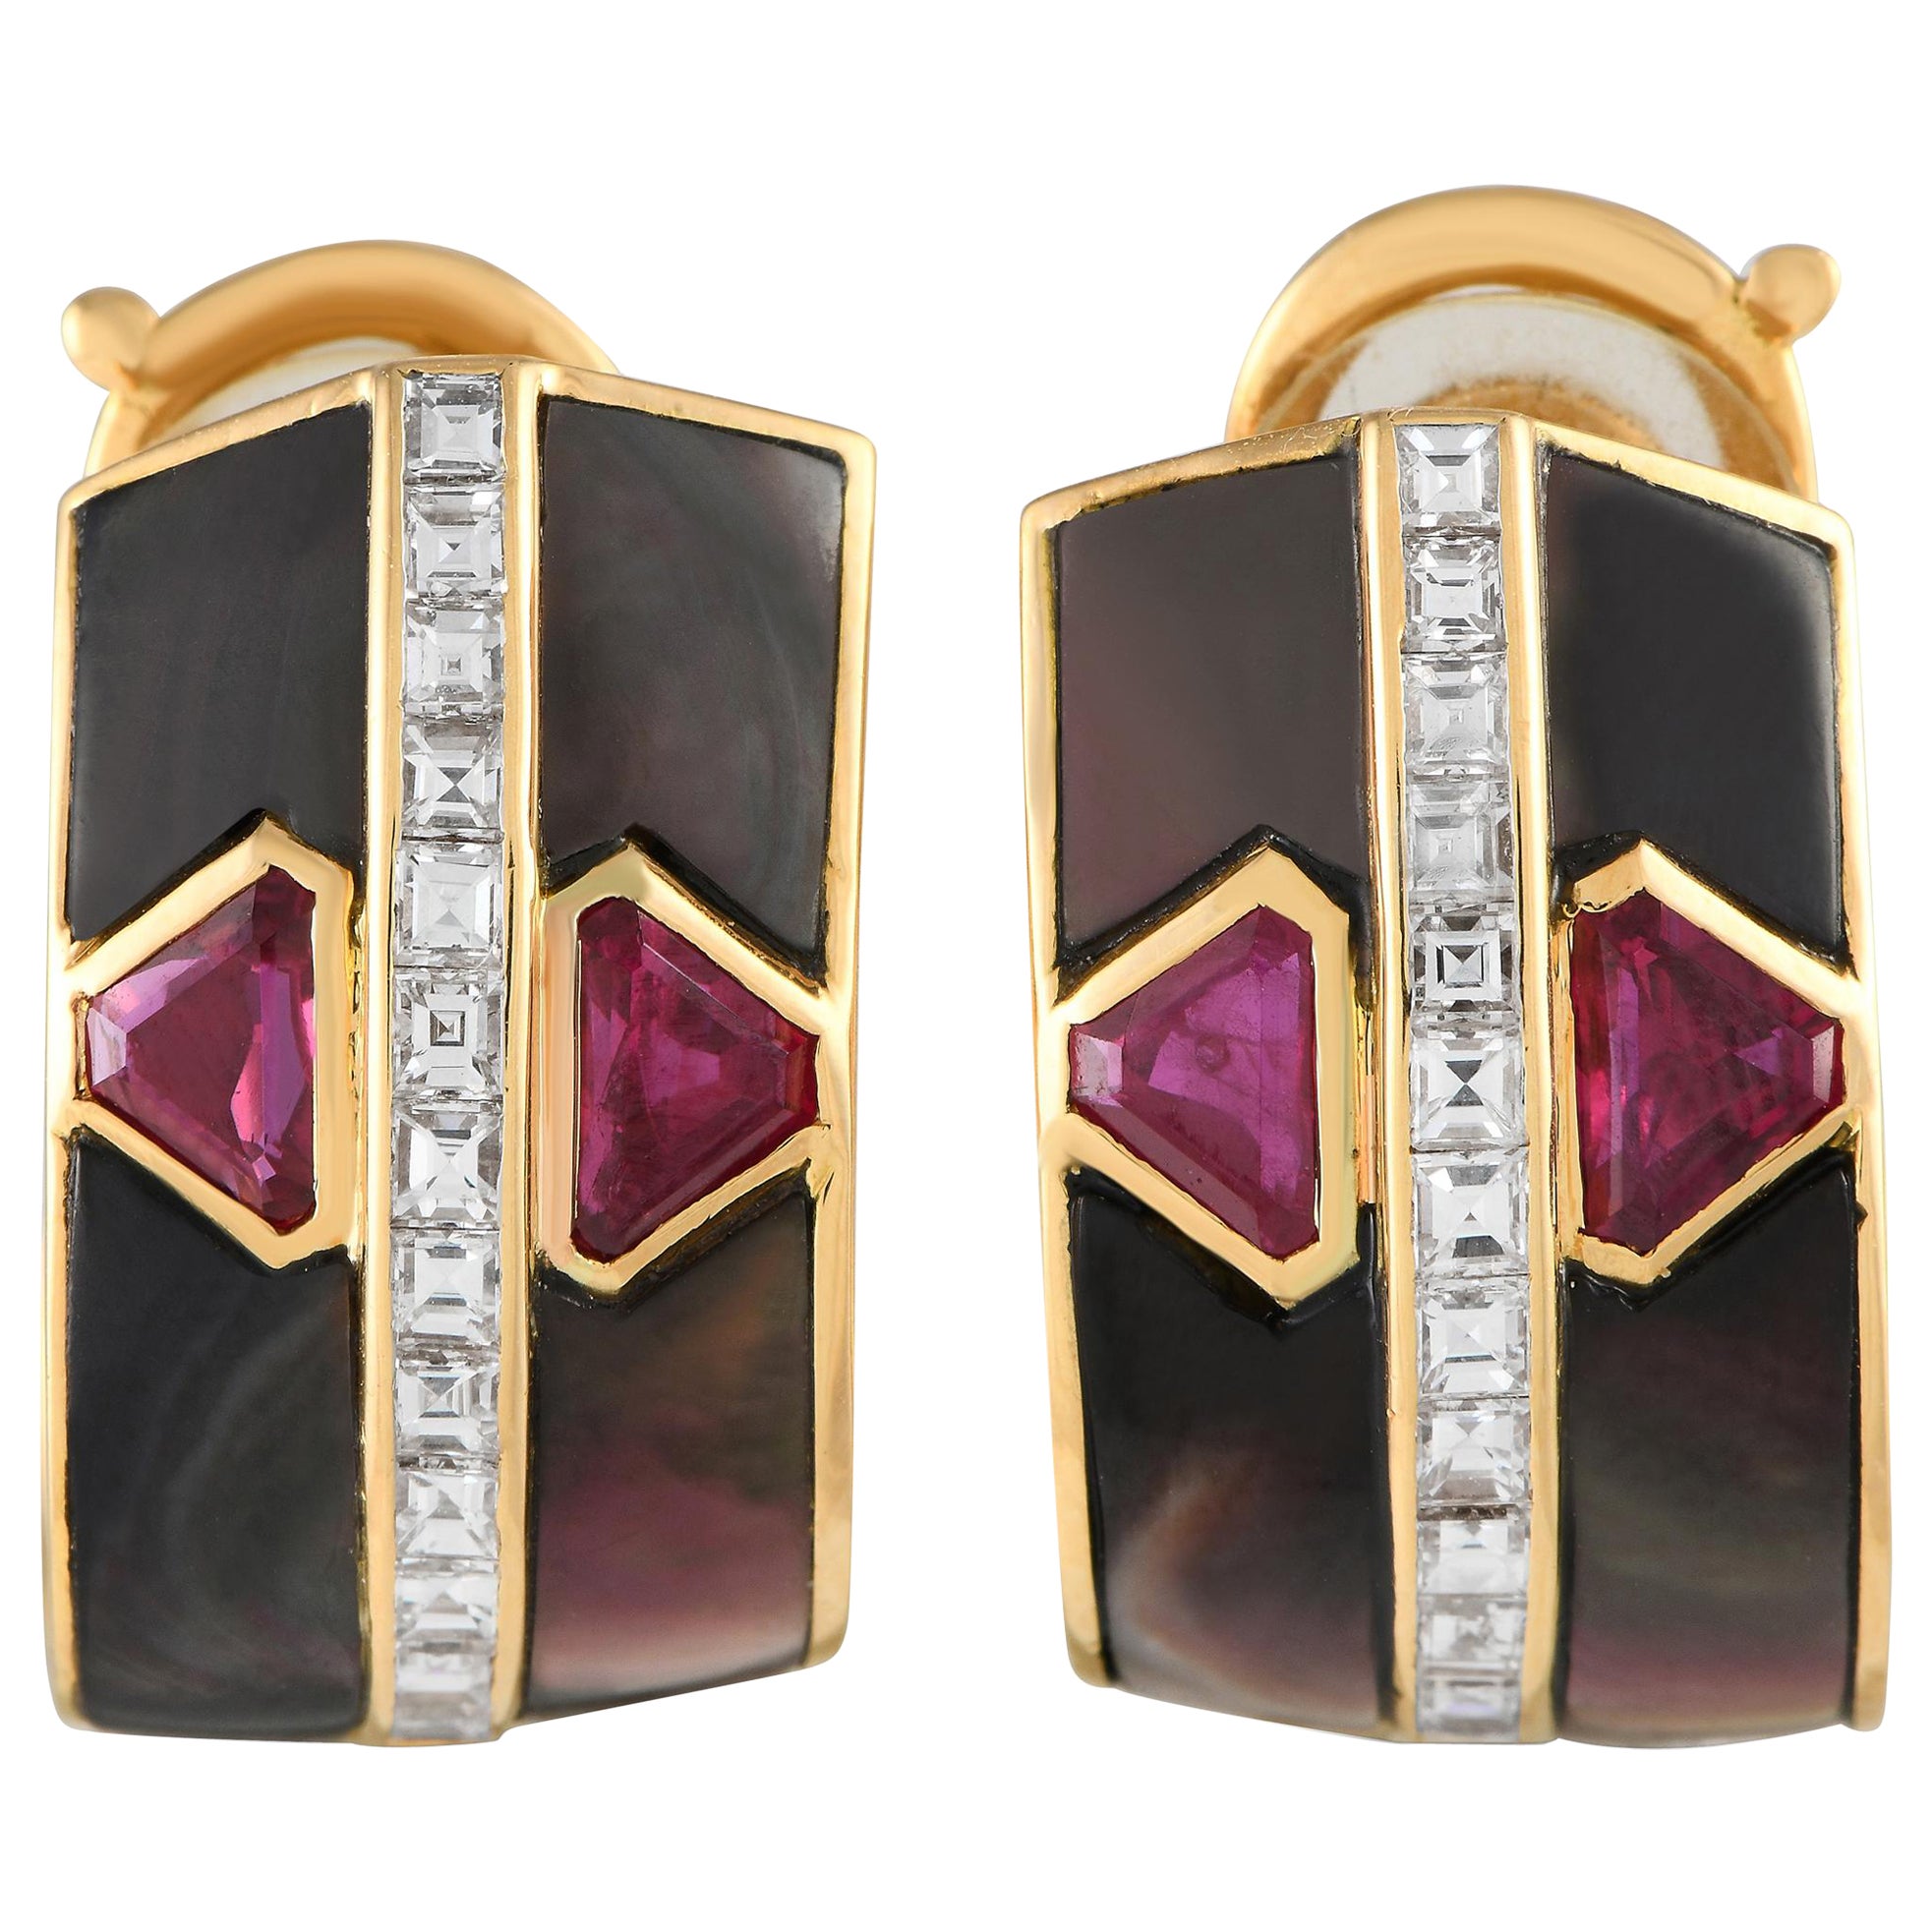 Piaget 18K Yellow Gold Diamond & Mother of Pearl Clip-On Earrings VC12-120523 For Sale